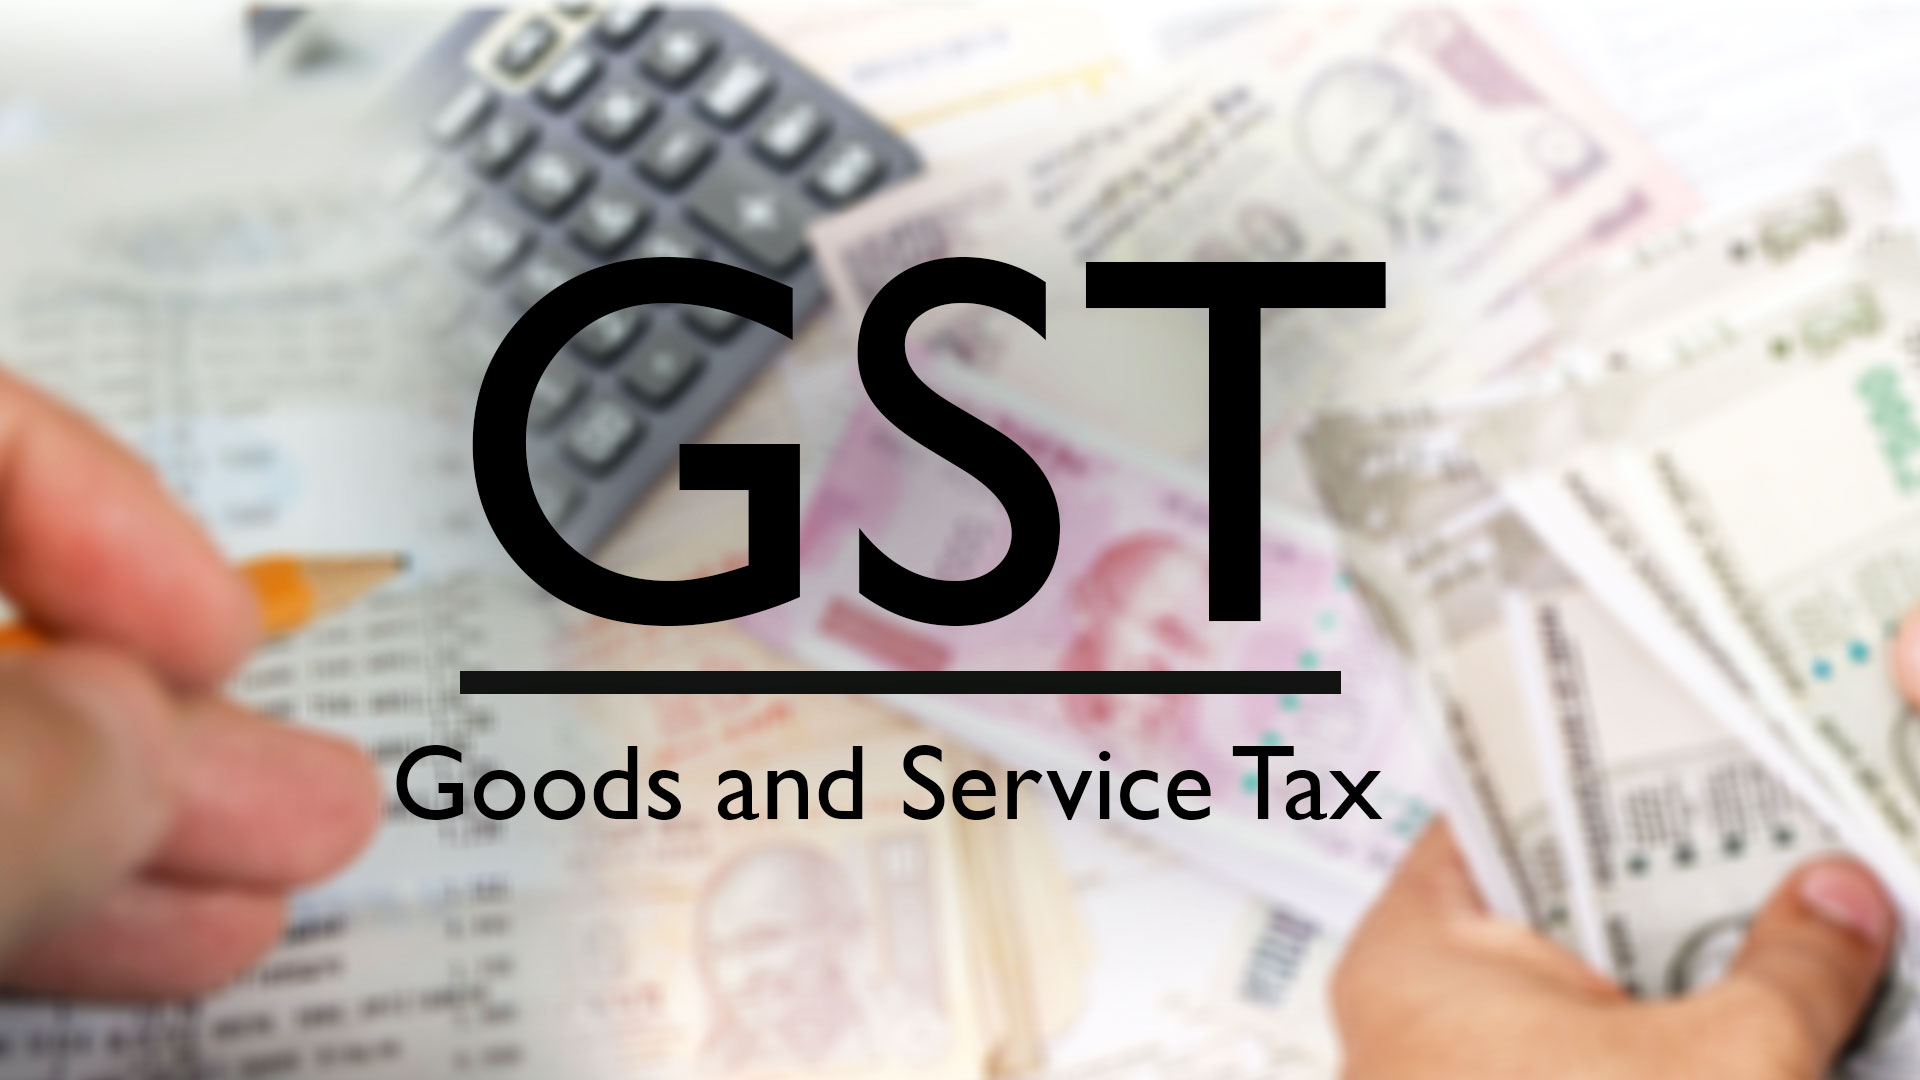 ADVANCE DIPLOMA IN GOODS AND SERVICE TAX